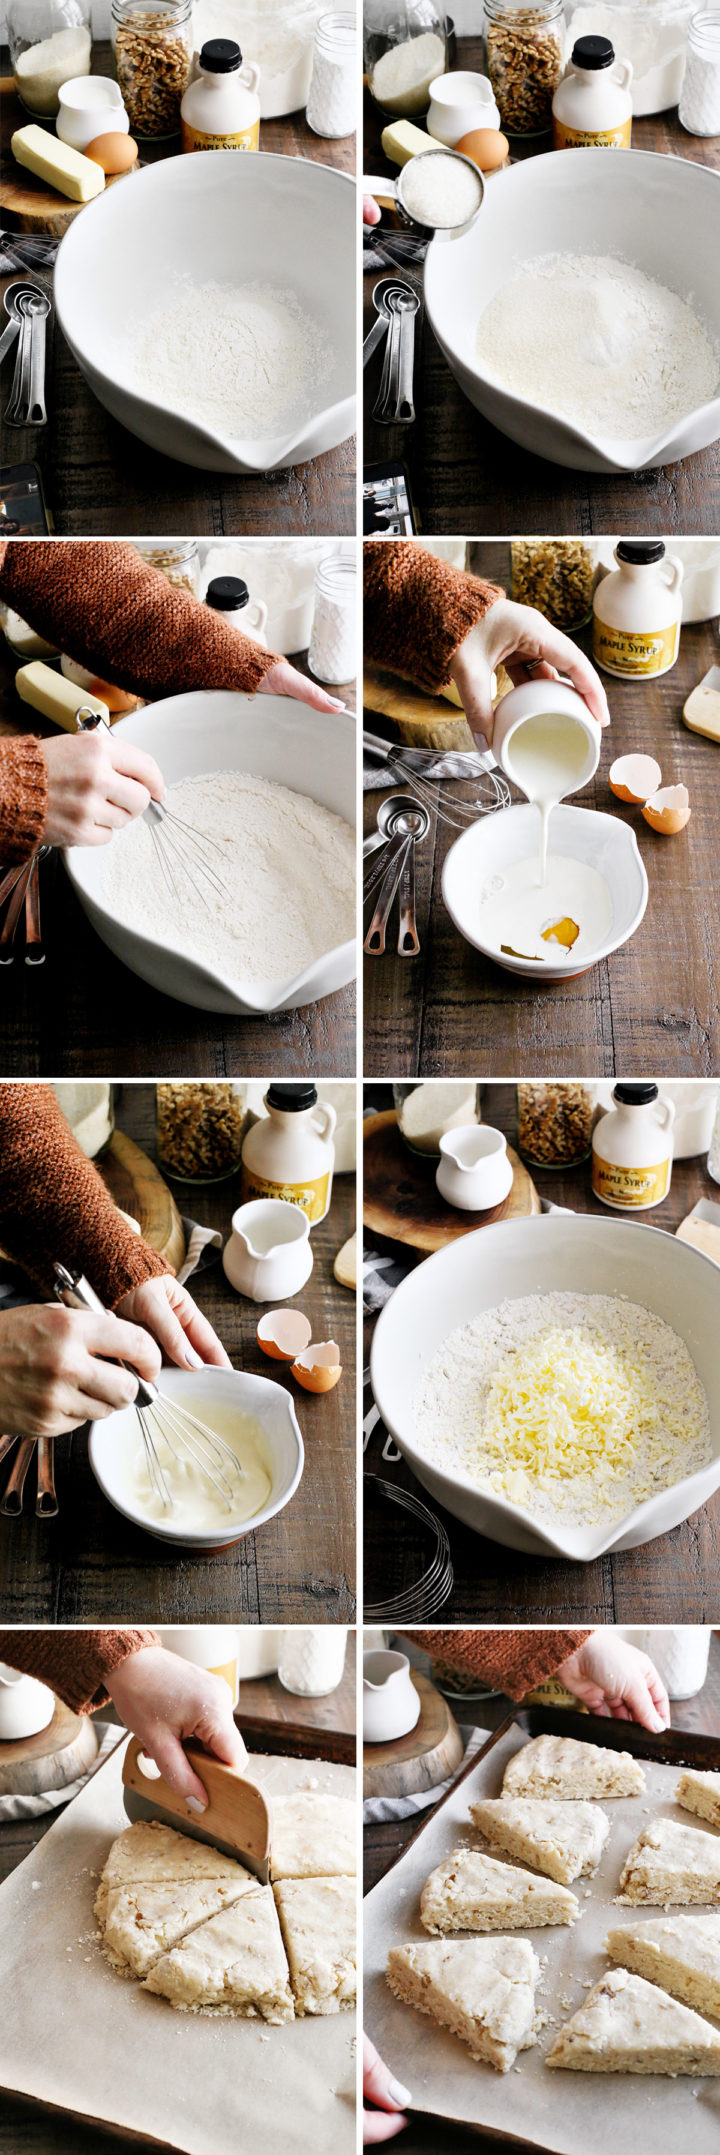 step by step photos showing how to make maple scones